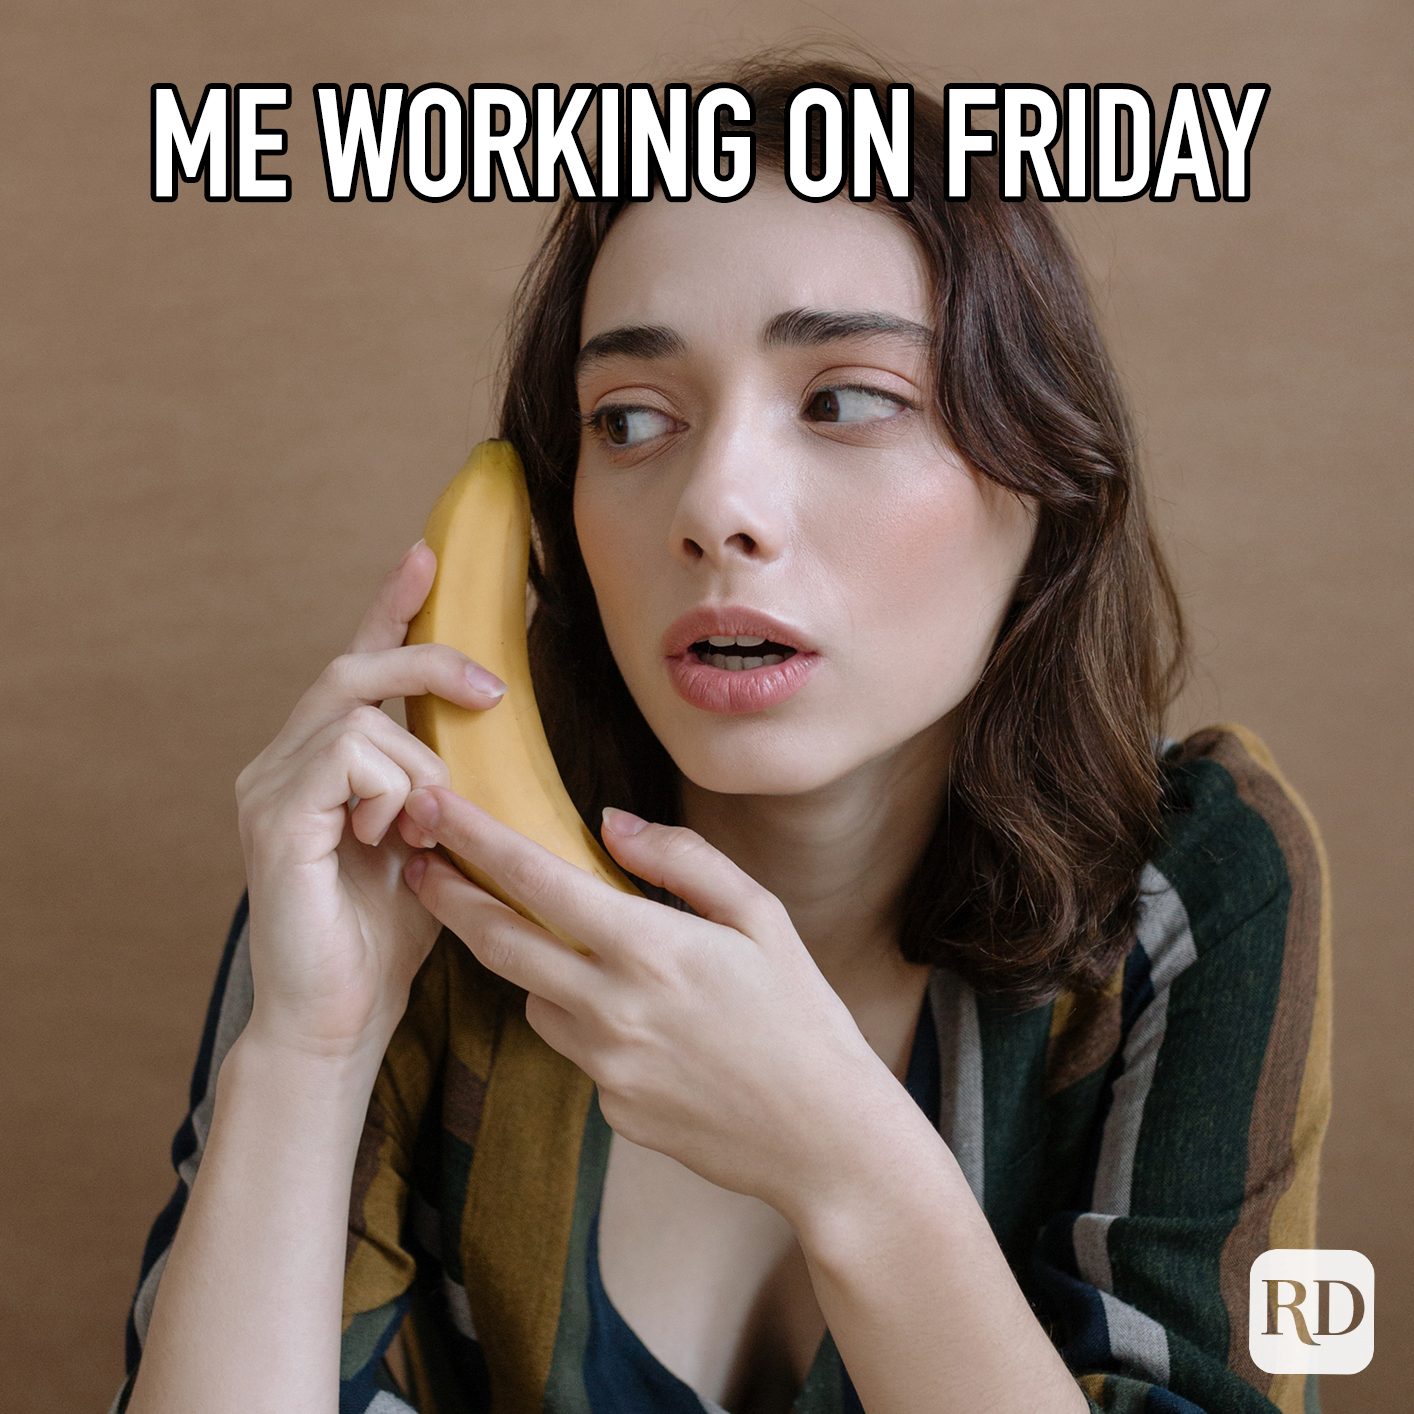 me-working-on-friday.jpg?fit=700,700